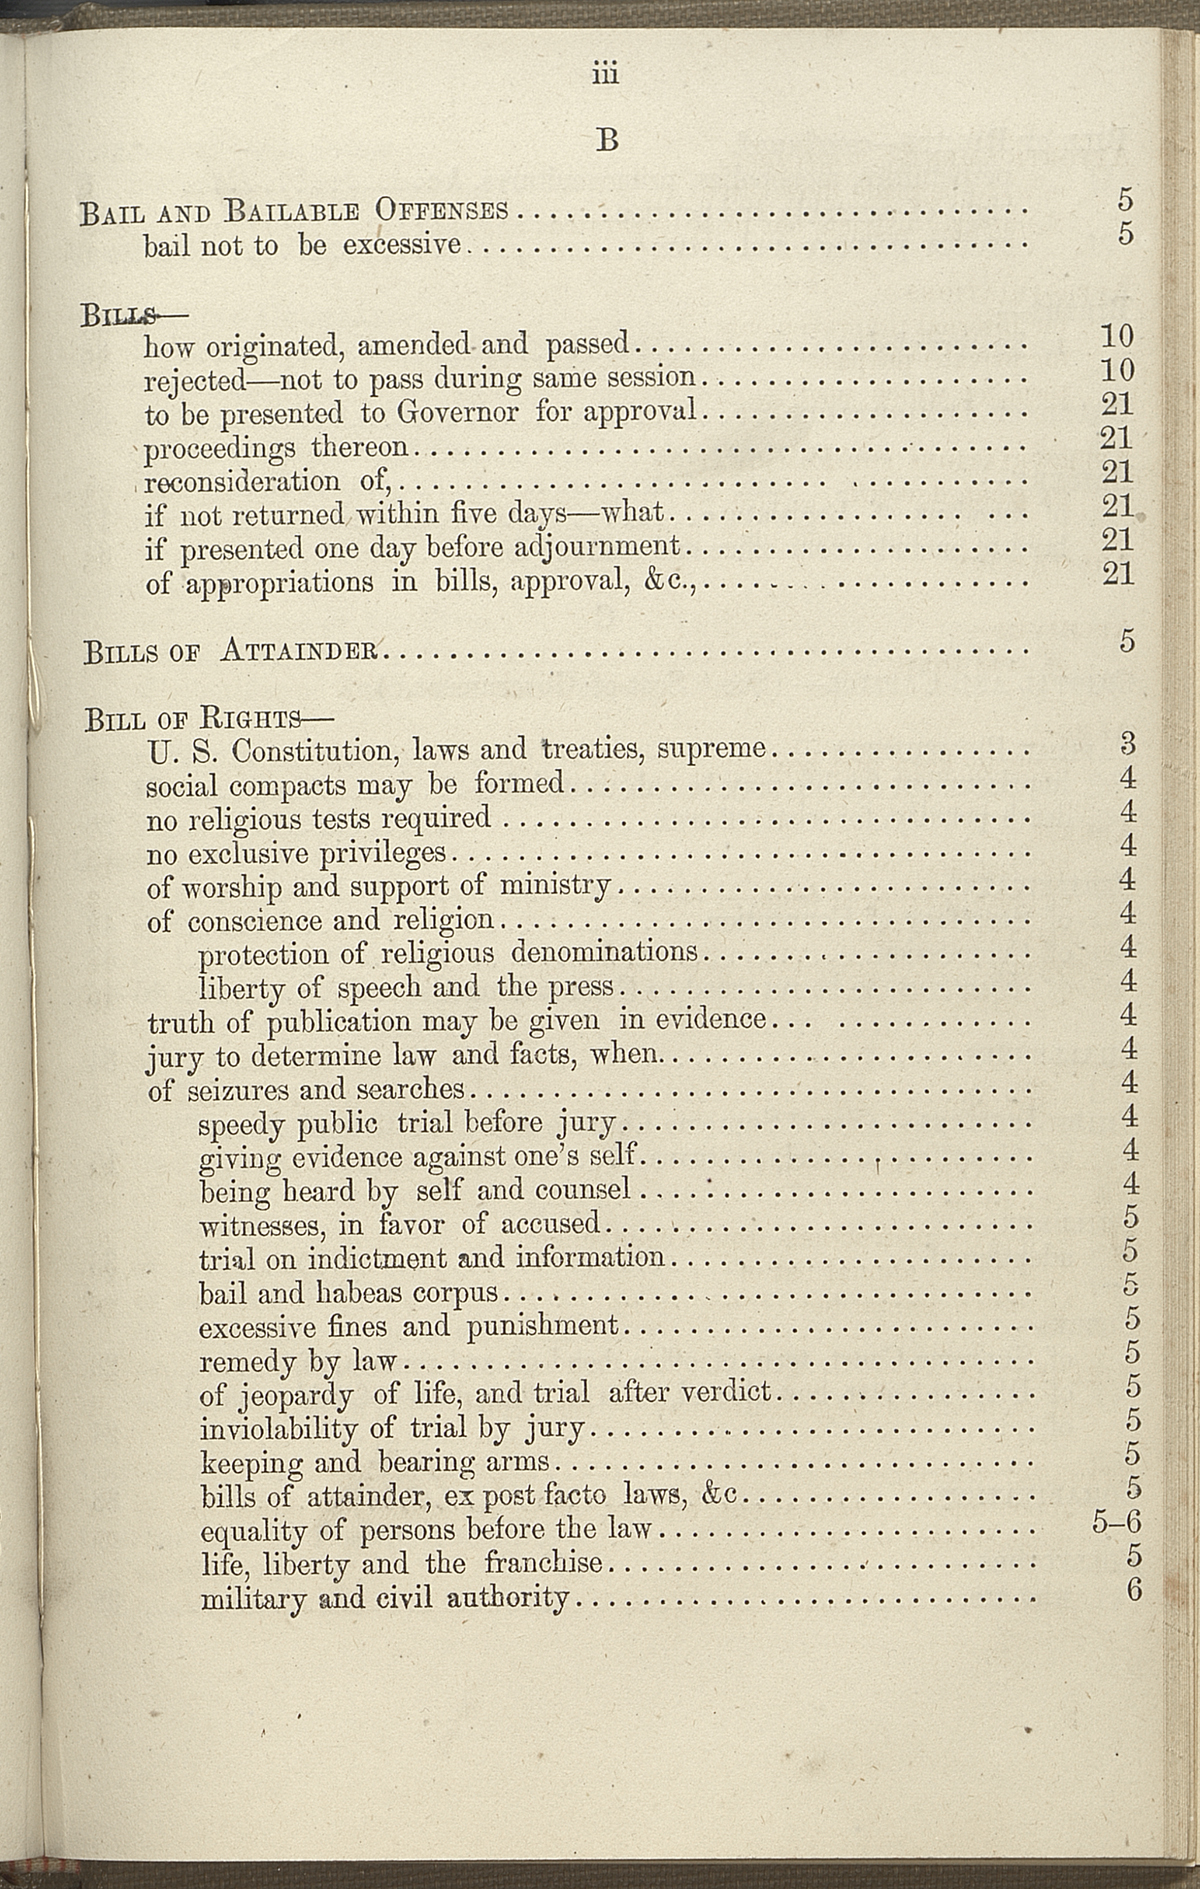 page 3 - 1869 index